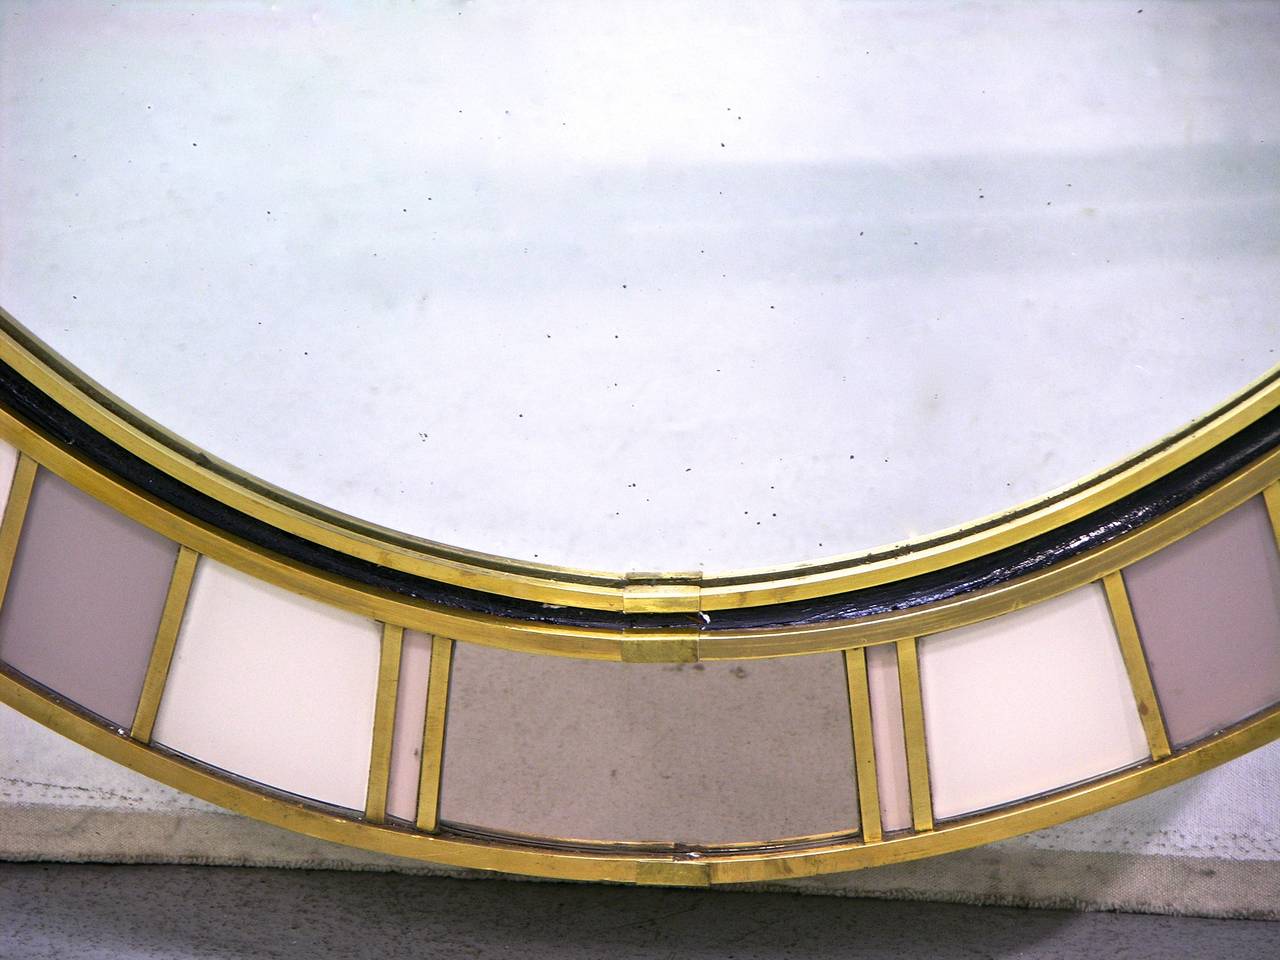 A custom-made unique sophisticated mirror, entirely handmade: The bronze edged central oval plate is framed by a concave black lacquered wood border that defines the substantial glass frame decorated with bronze insets that divide Murano glass and